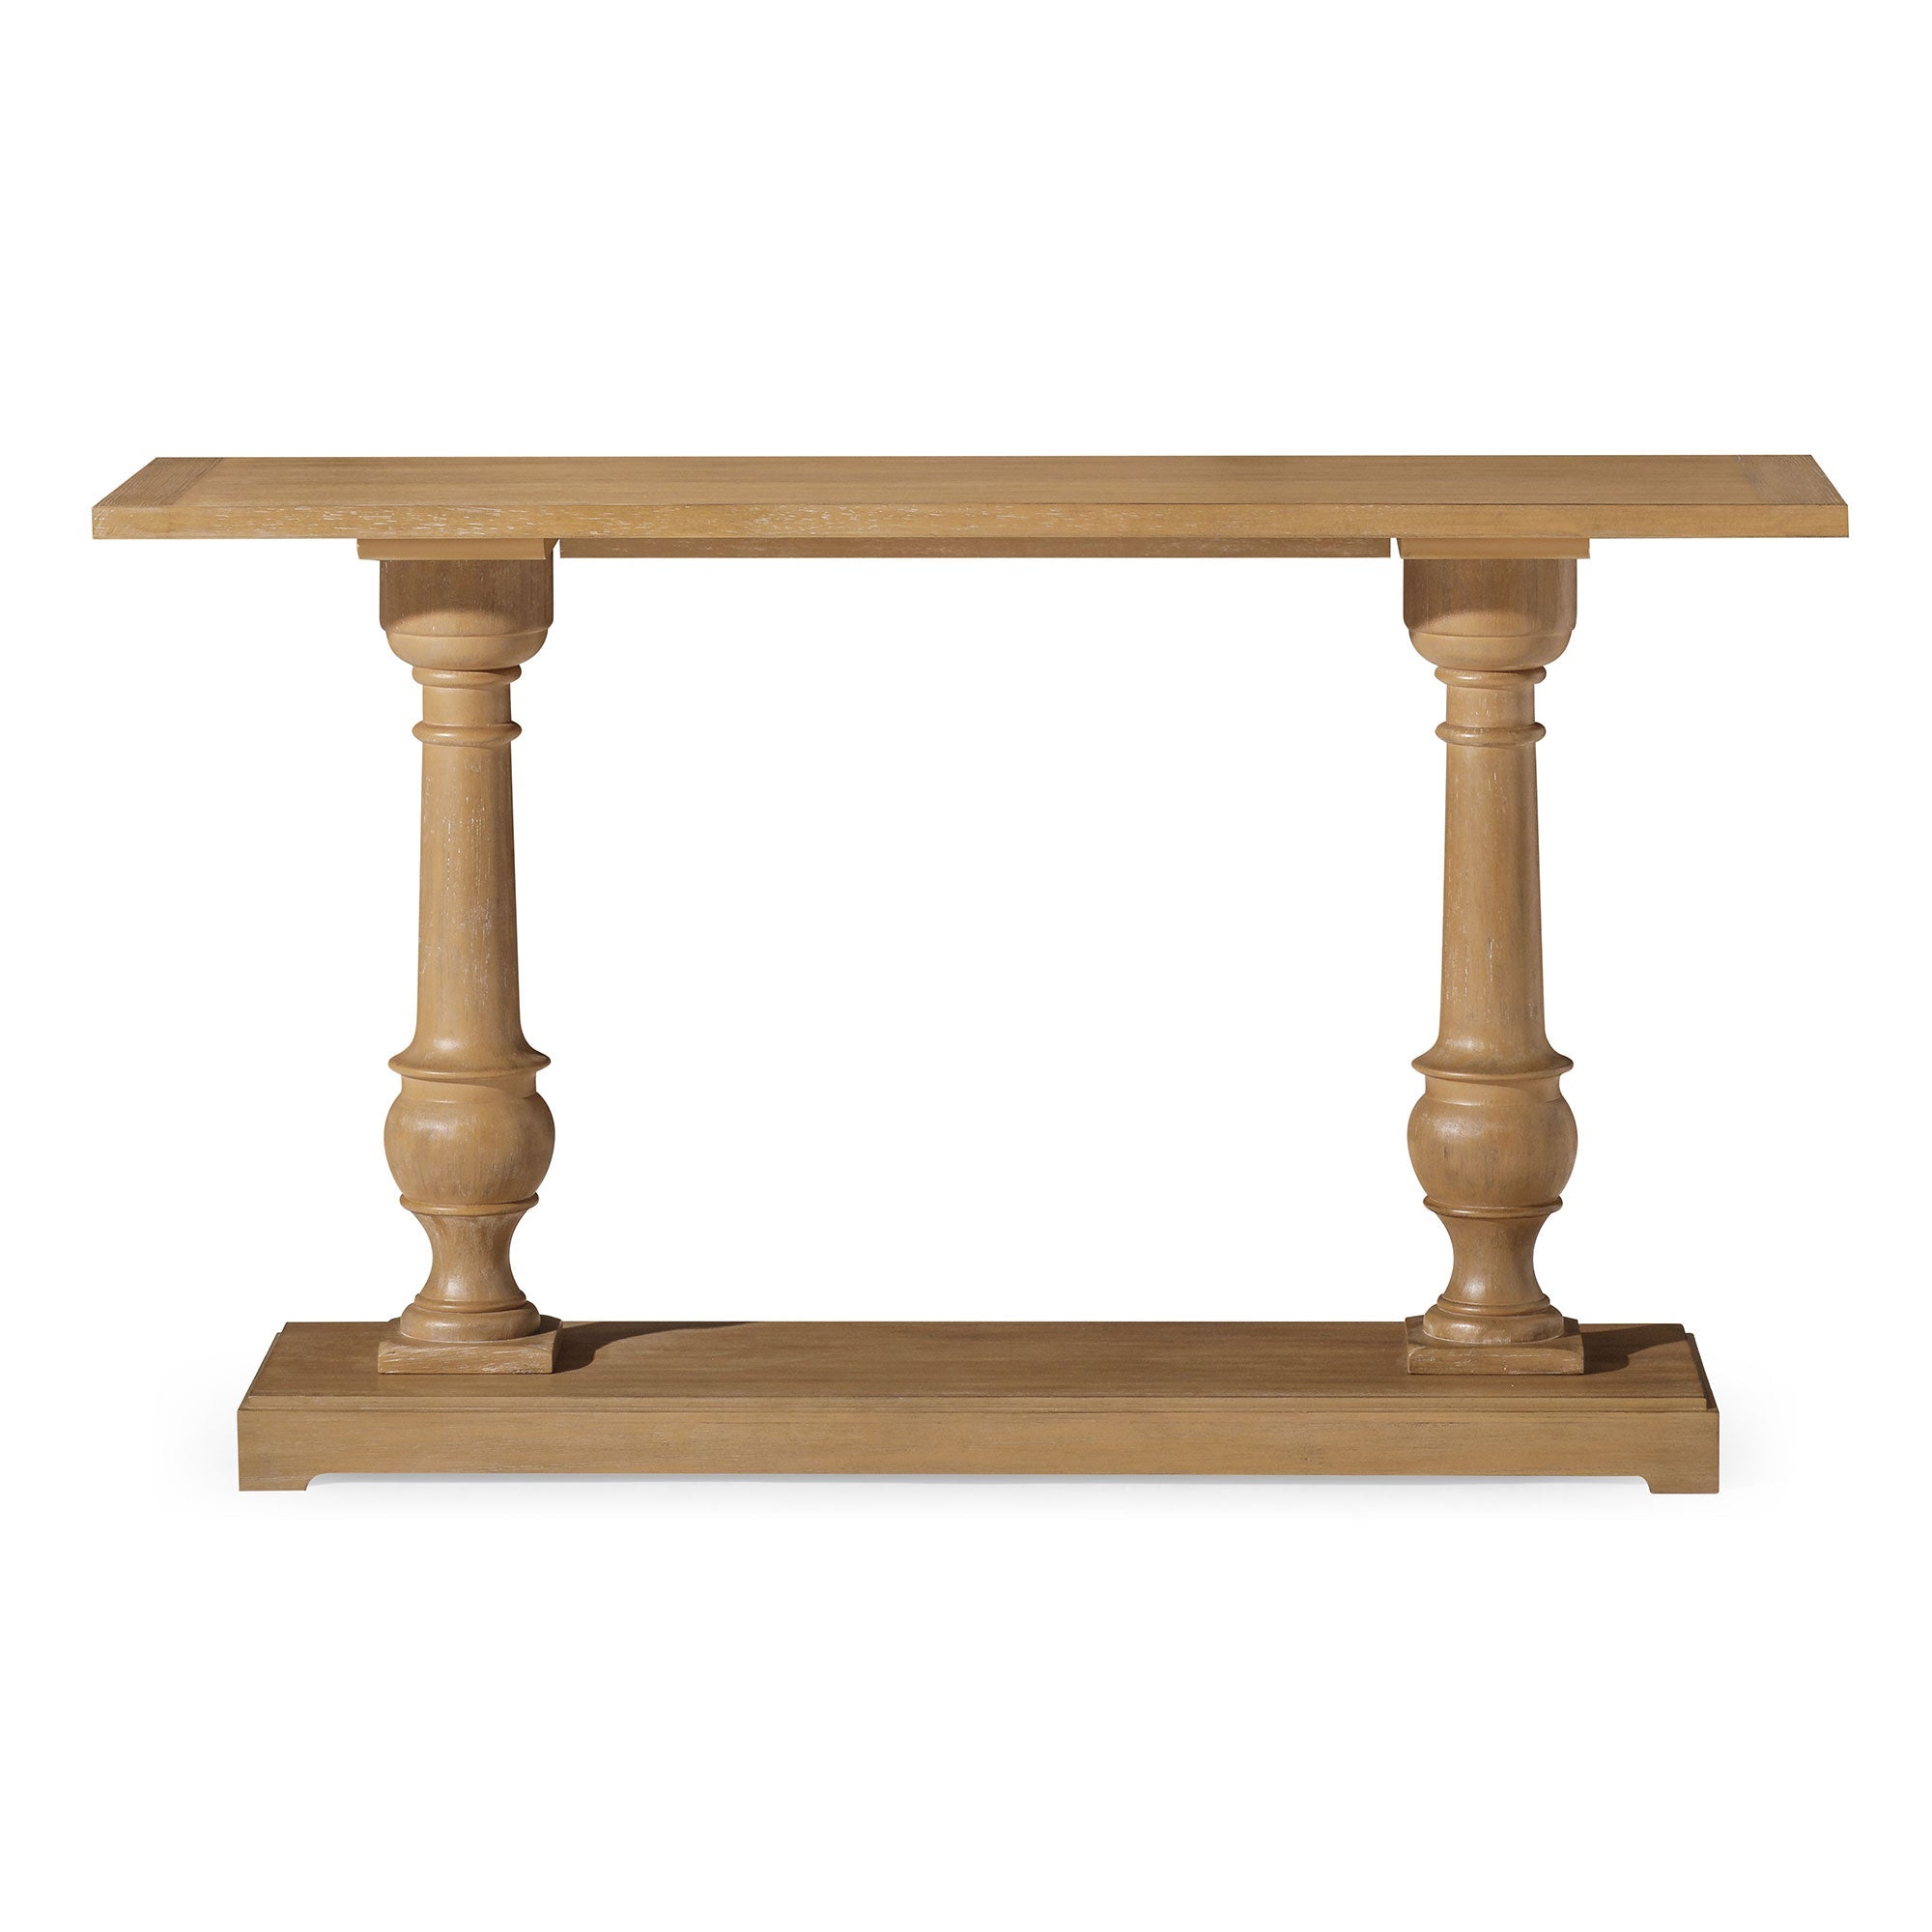 Arthur Traditional Wooden Console Table in Antiqued Natural Finish